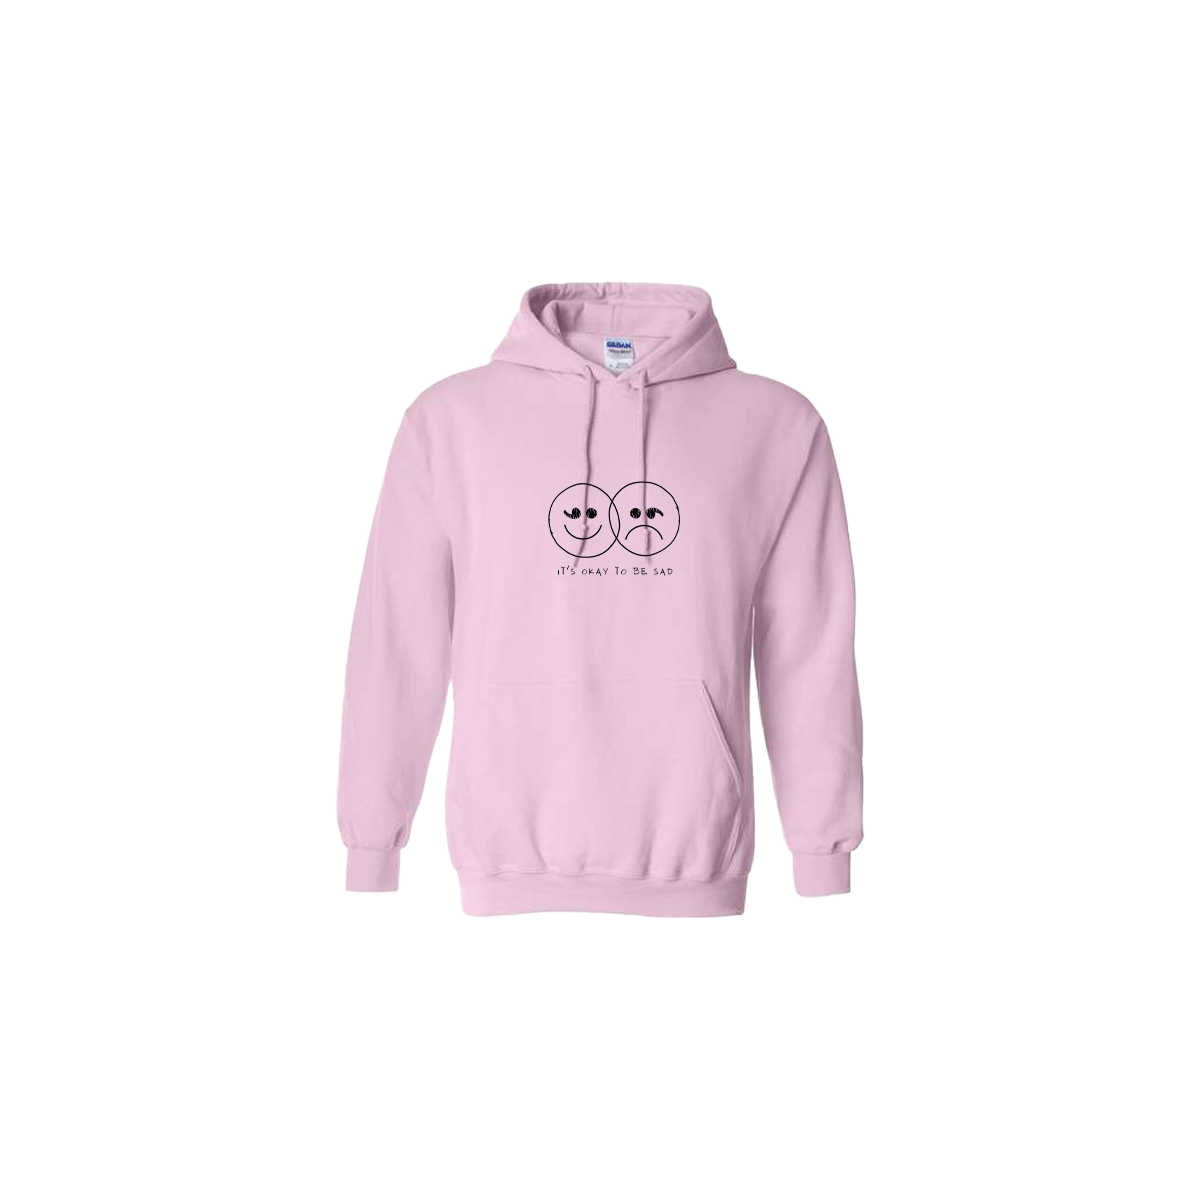 It's Okay to be Sad Double Smiley Face Embroidered Light Pink Hoodie - Mental Health Awareness Clothing